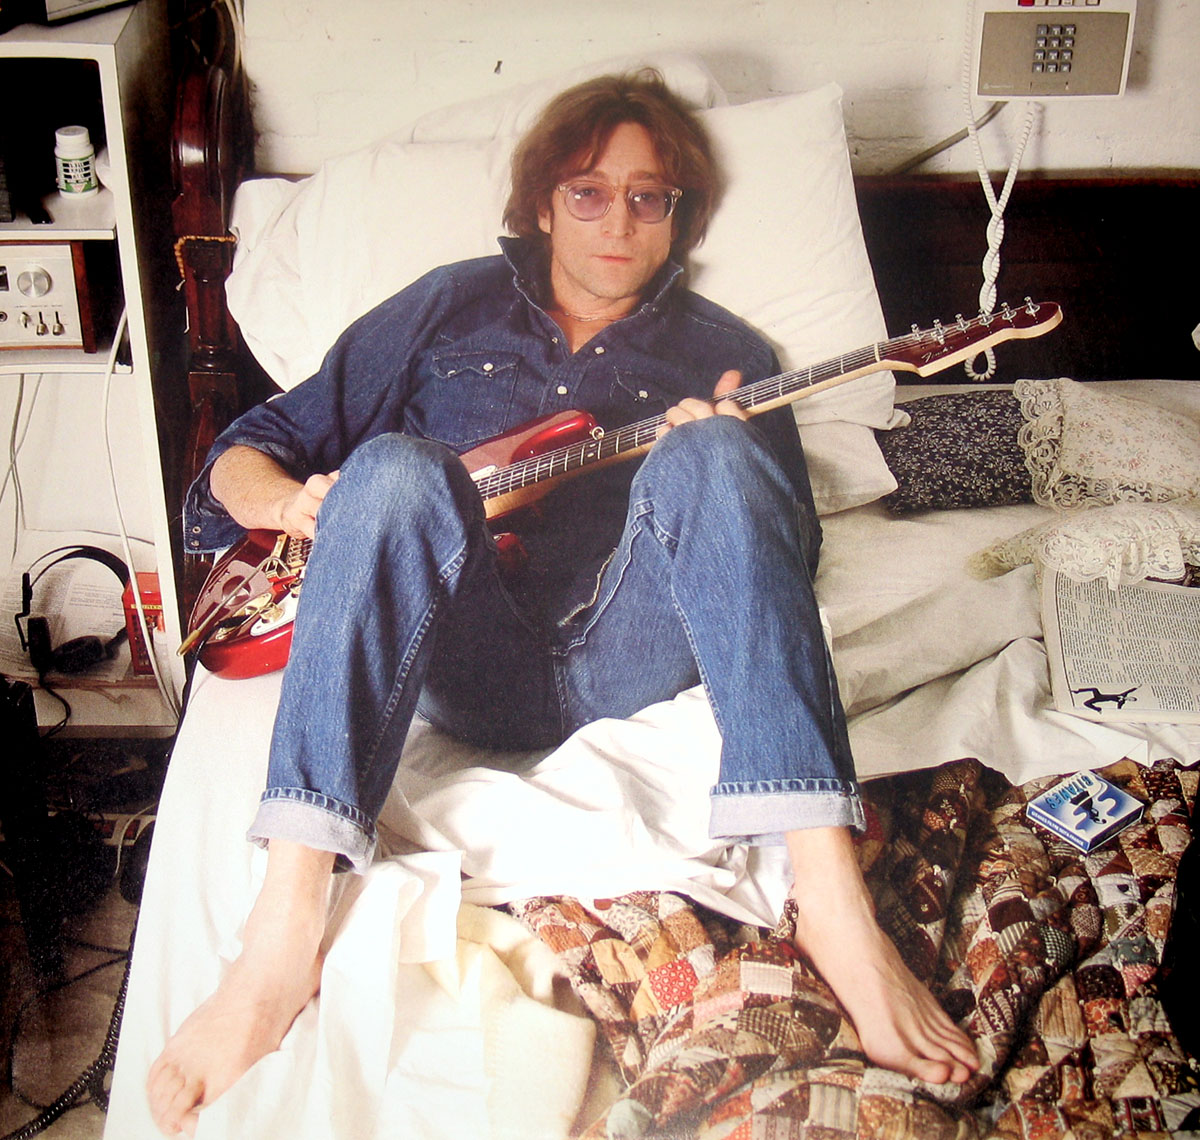 Photo of John Lennon sitting on the bed playing a Fender Stratocaster guitar look-a-like